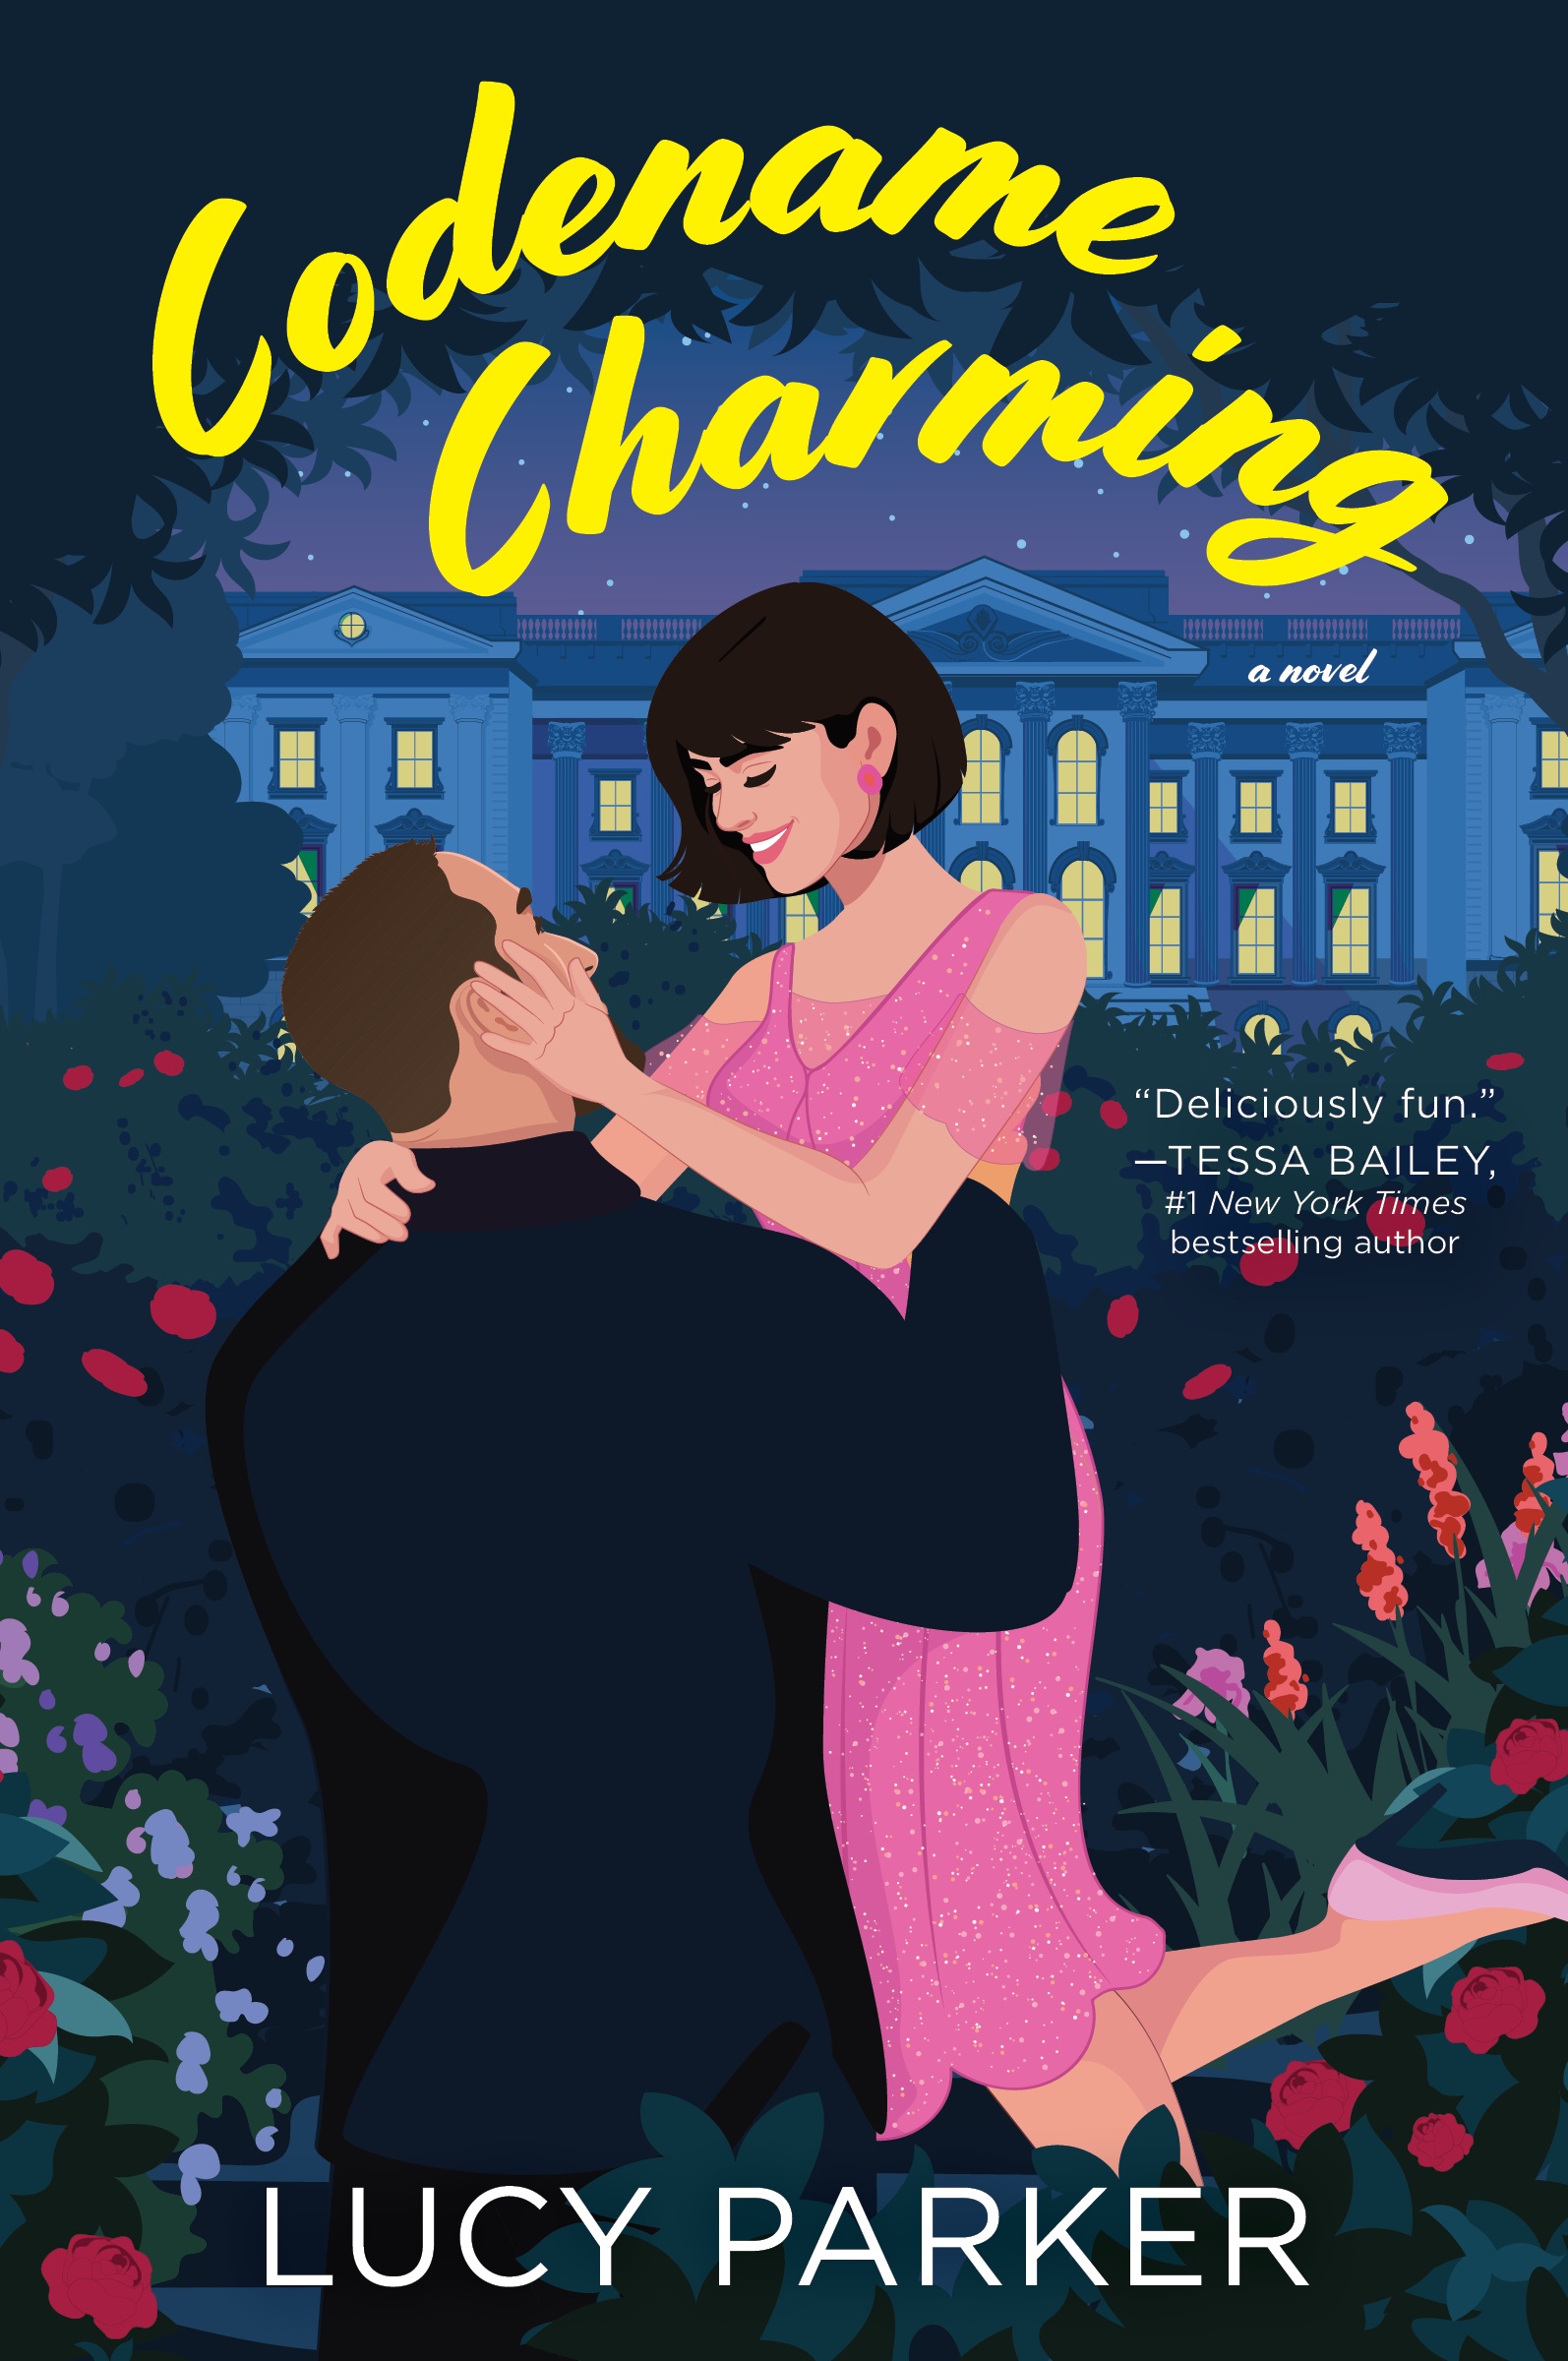 Codename Charming cover image